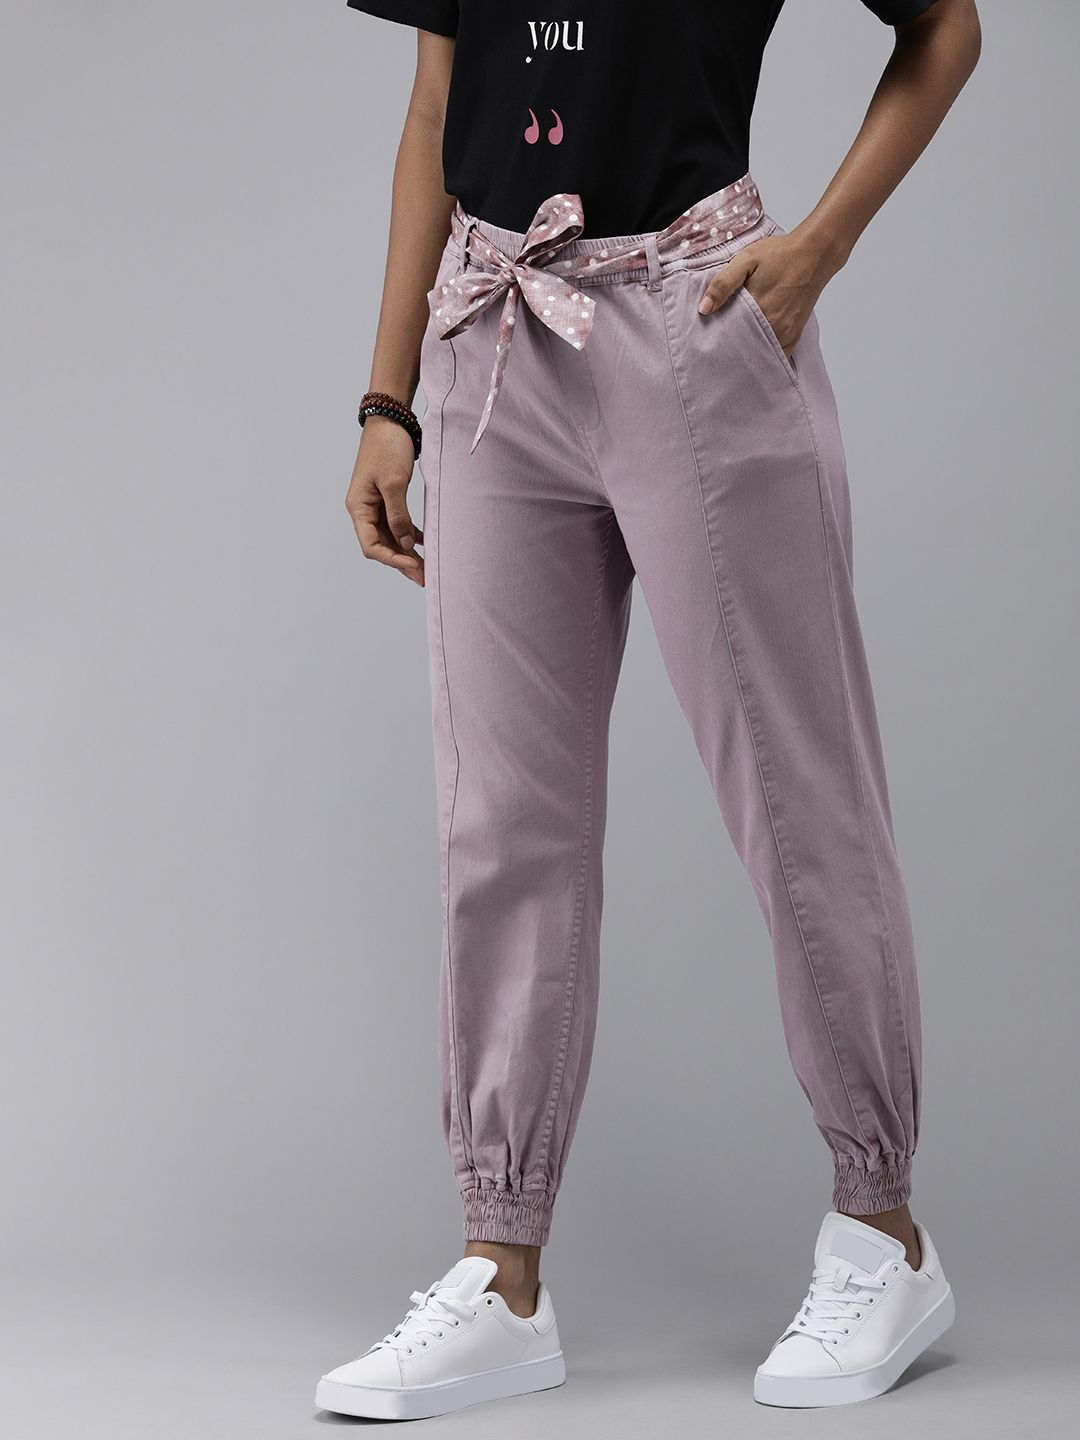 Roadster Women Lavender Solid Joggers Trousers Price in India